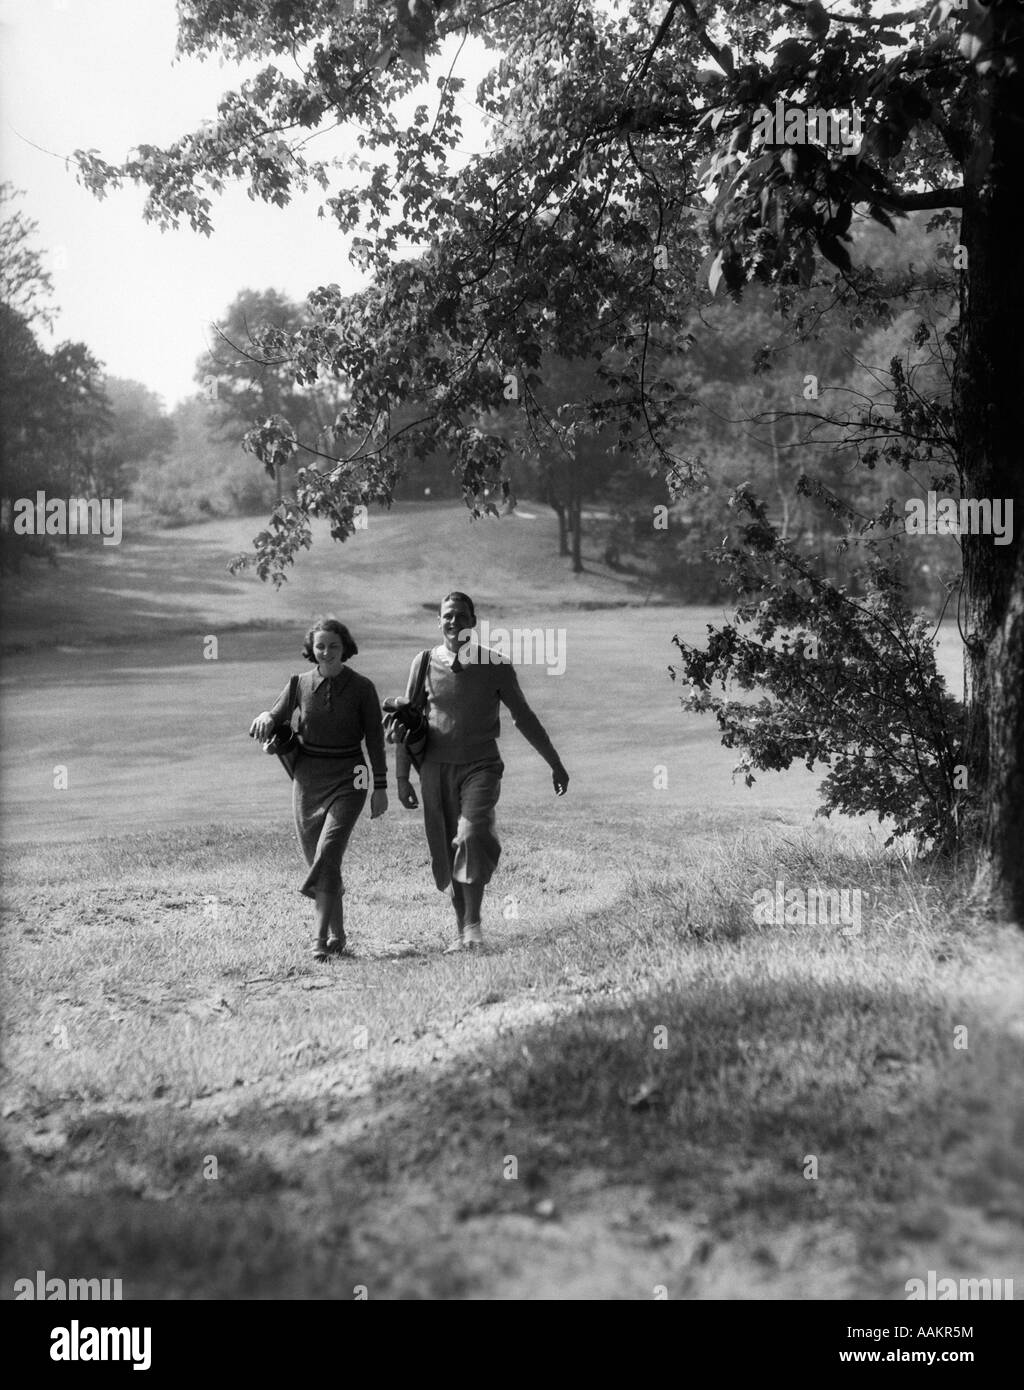 1930s COUPLE MAN WOMAN EACH CARRYING A GOLF BAG WALKING DOWN THE FAIRWAY OF THE GOLF COURSE Stock Photo